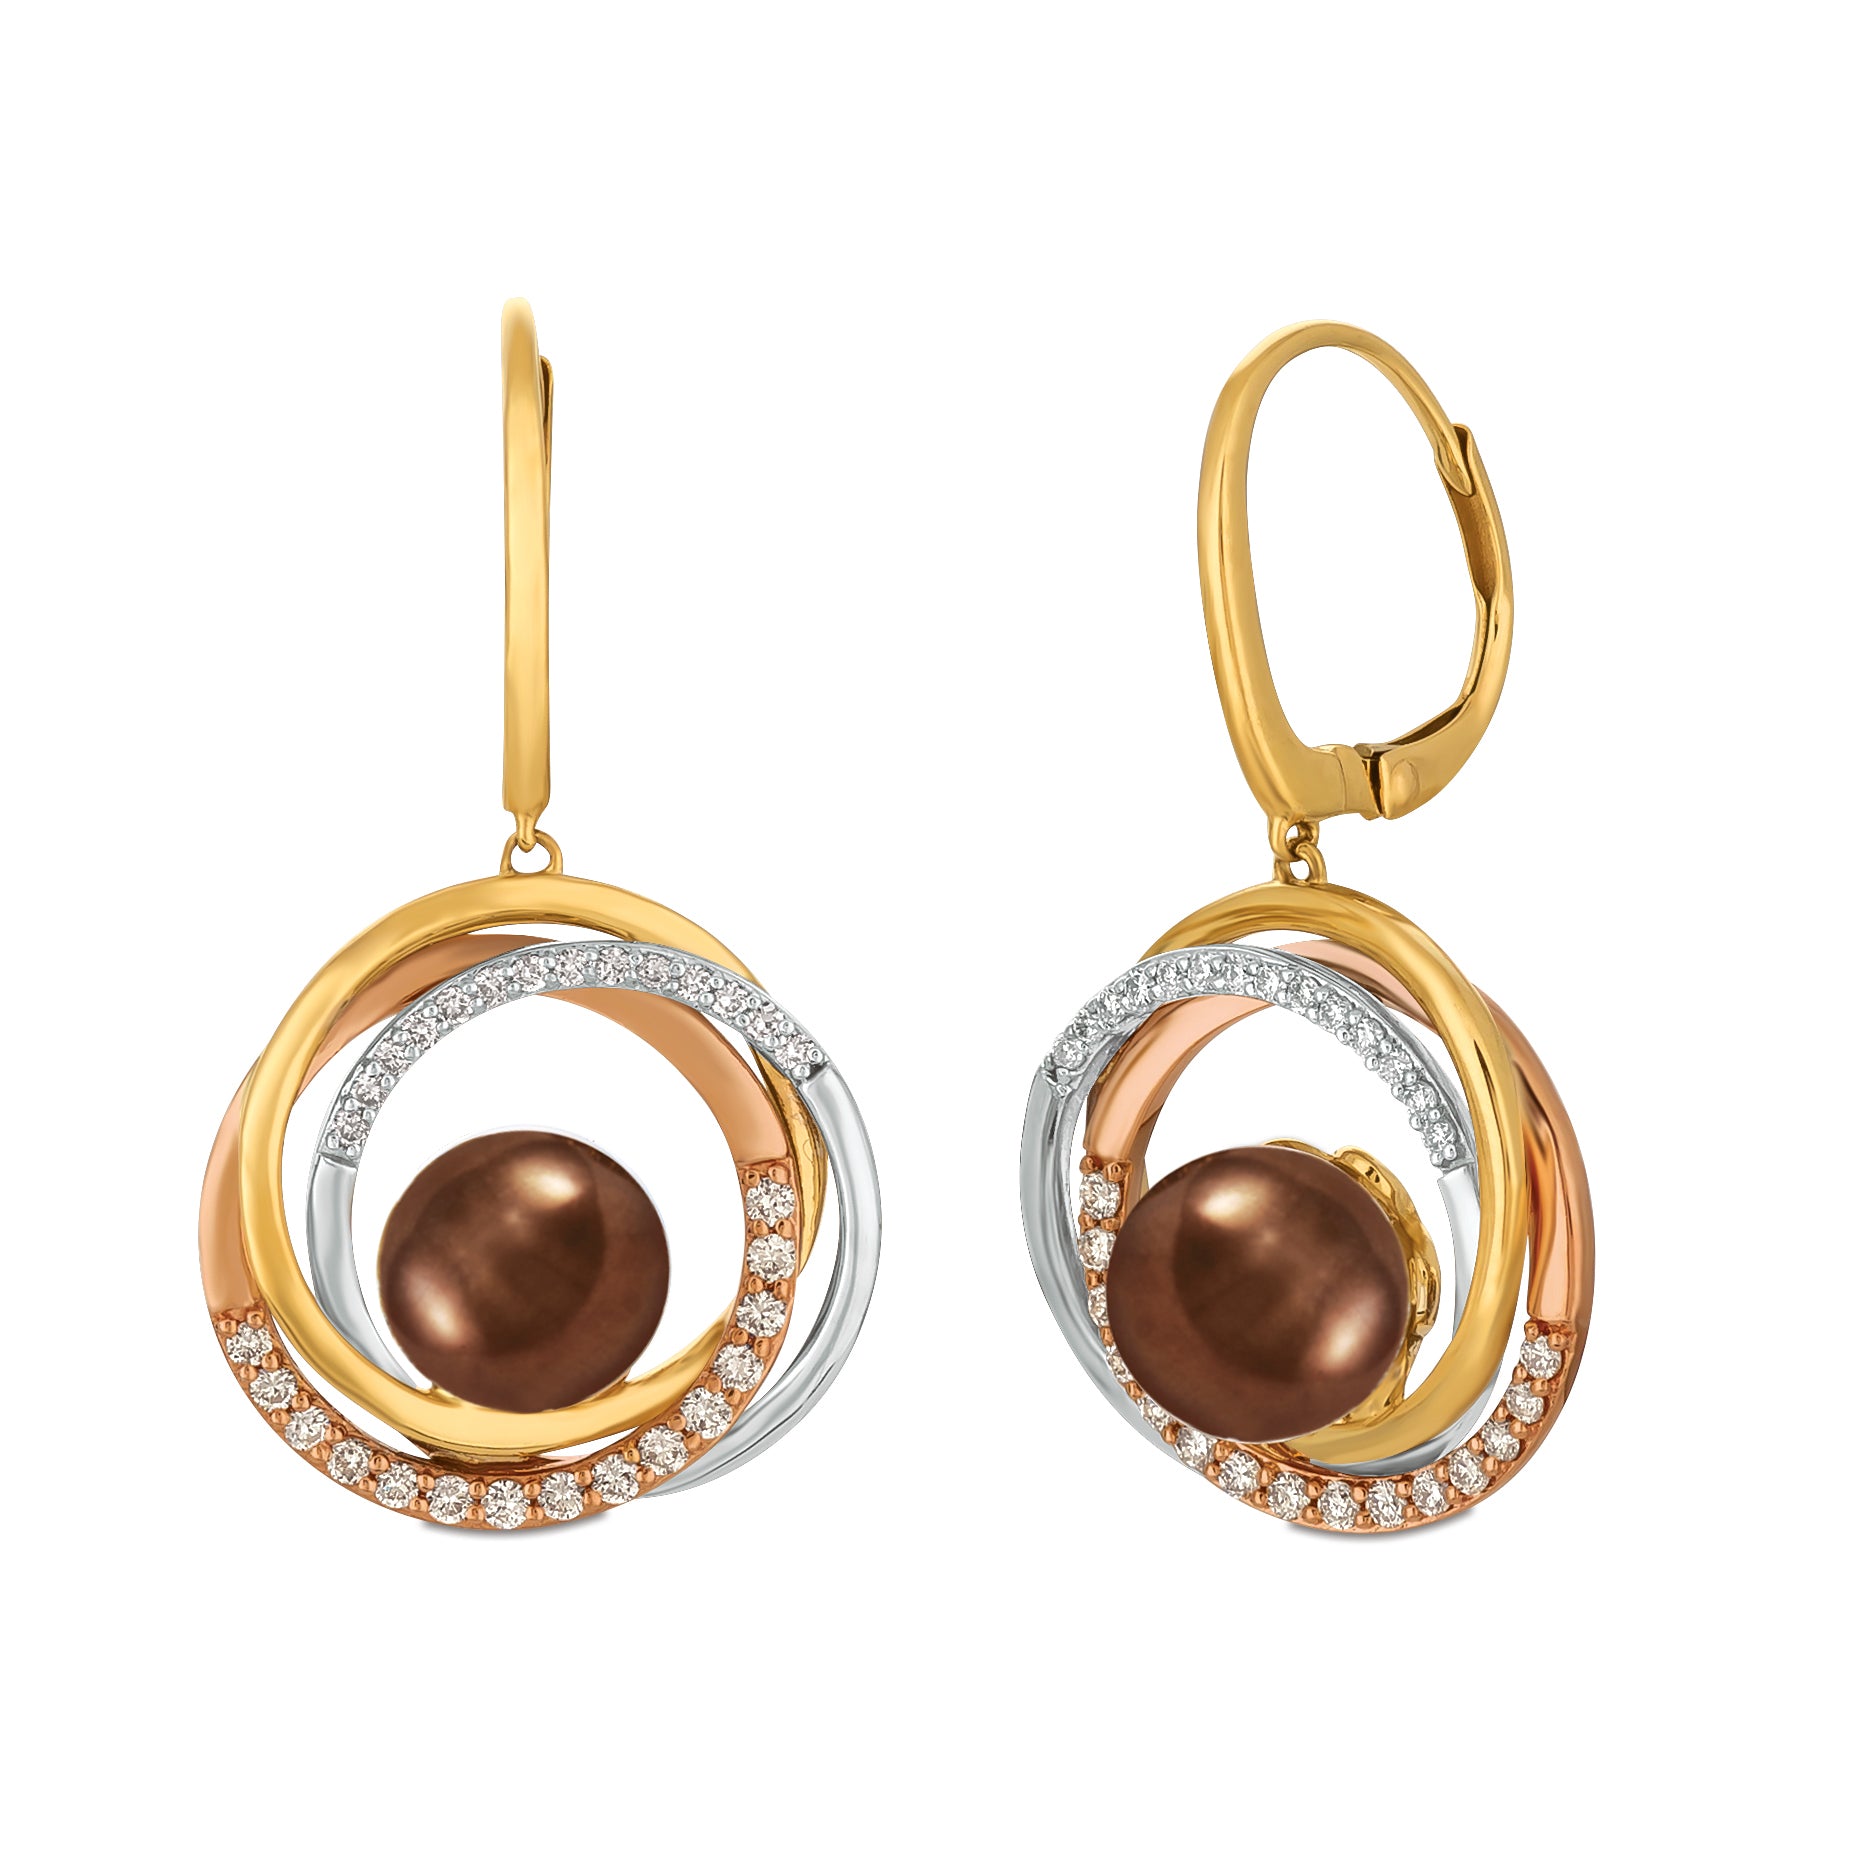 Le Vian Earrings featuring Chocolate Pearls Vanilla Diamonds set in 14K Tri Color Gold